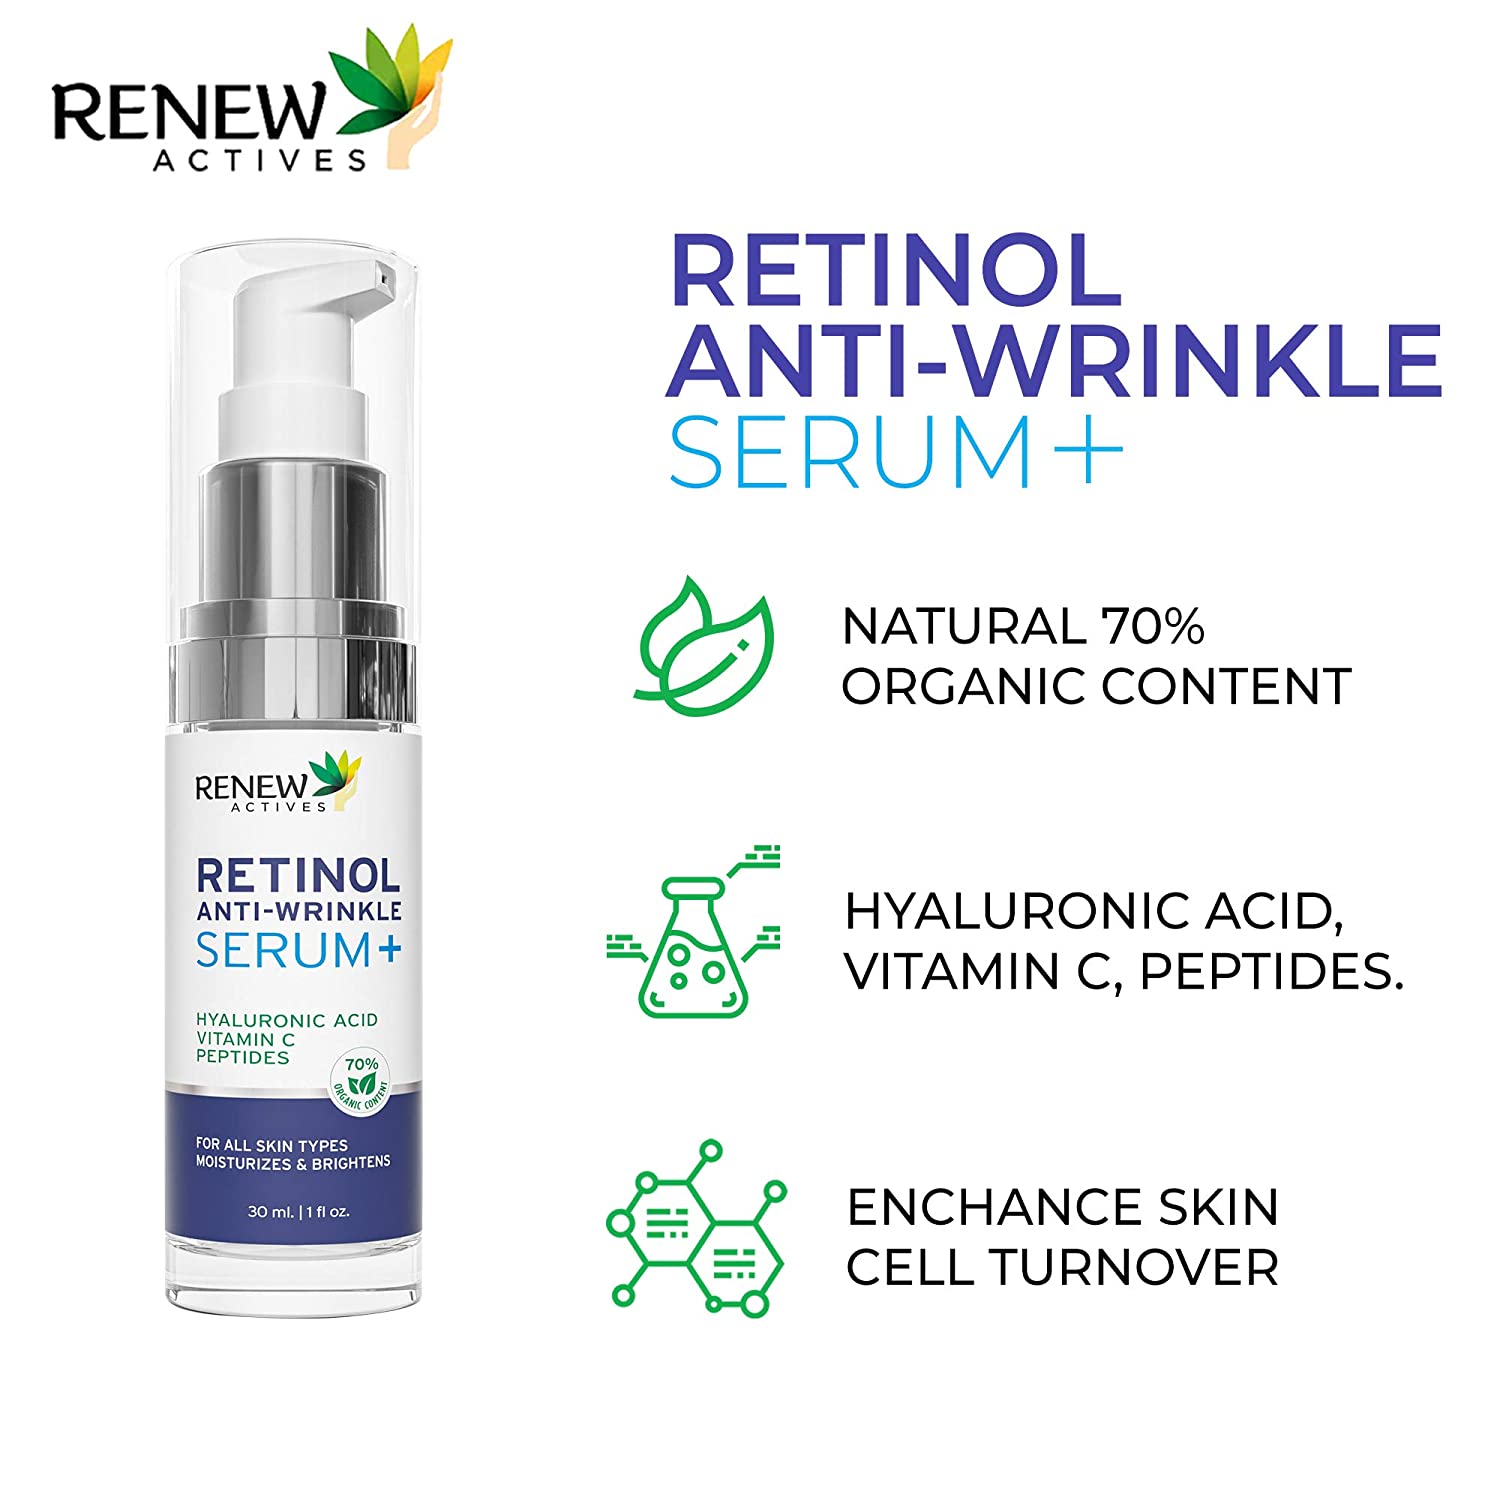 Pure 1% Retinol Serum for Face with Hyaluronic Acid & Vitamin C